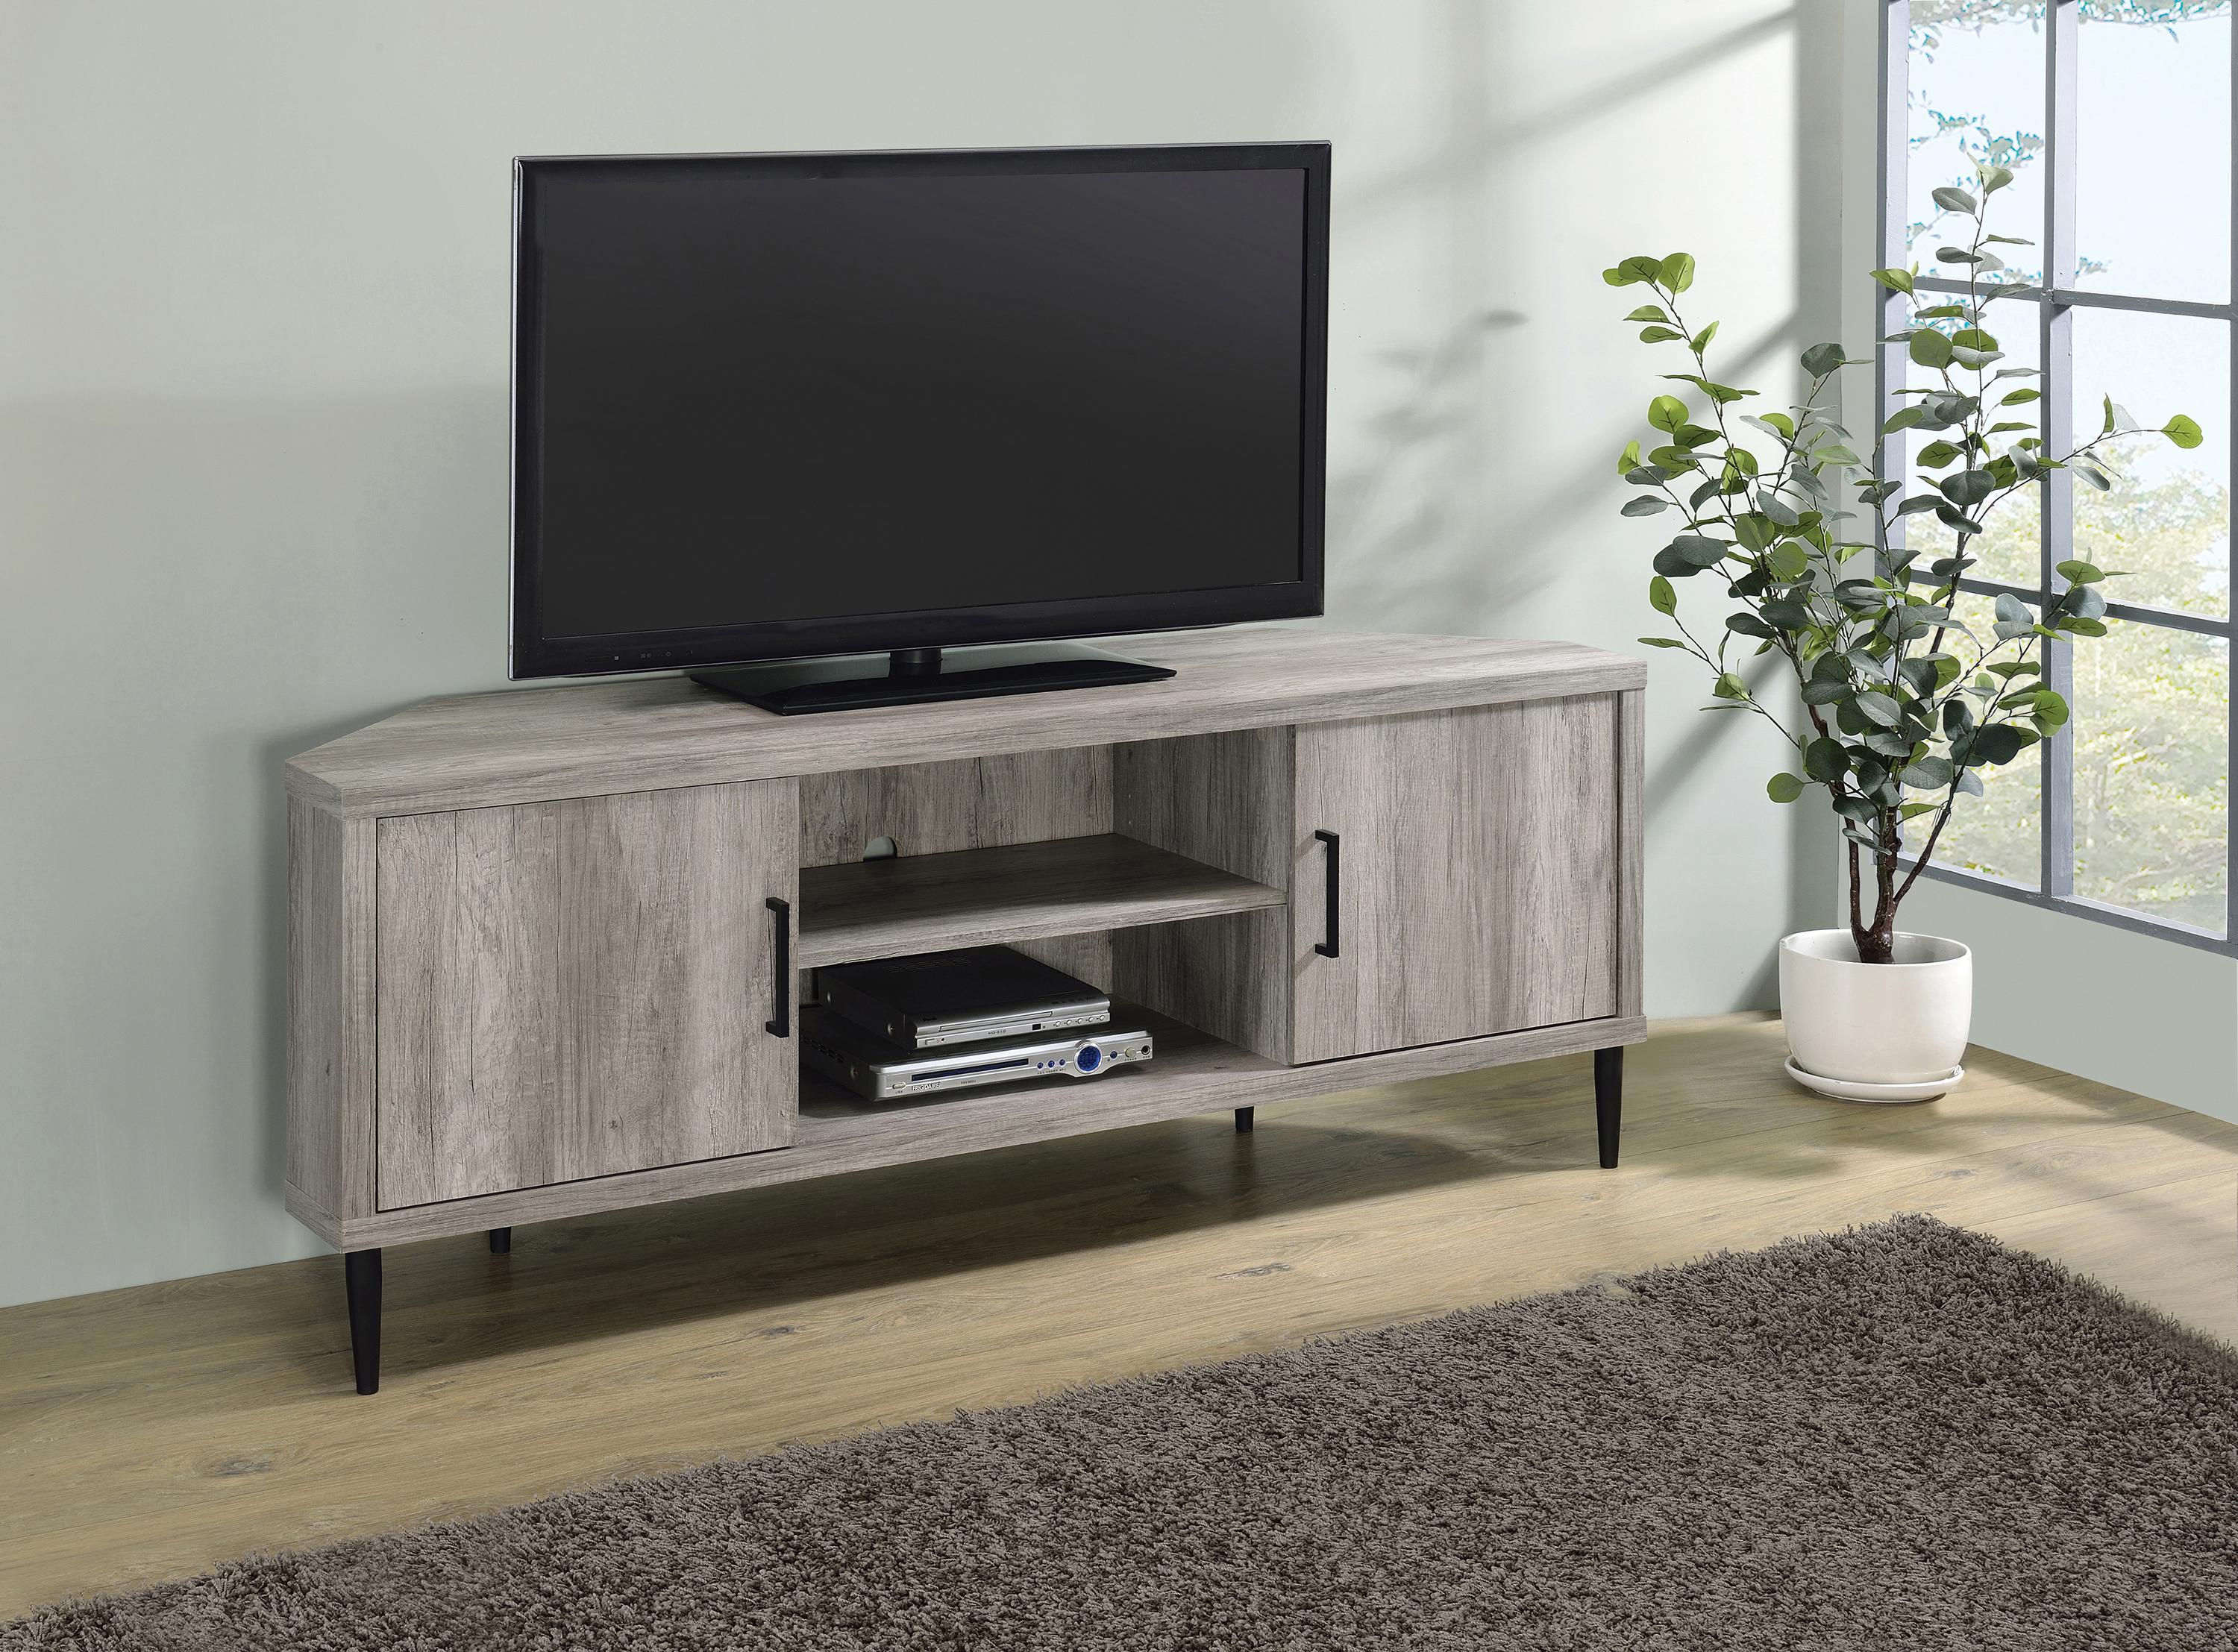 Modern Tv Console 723641 723641 in Driftwood 